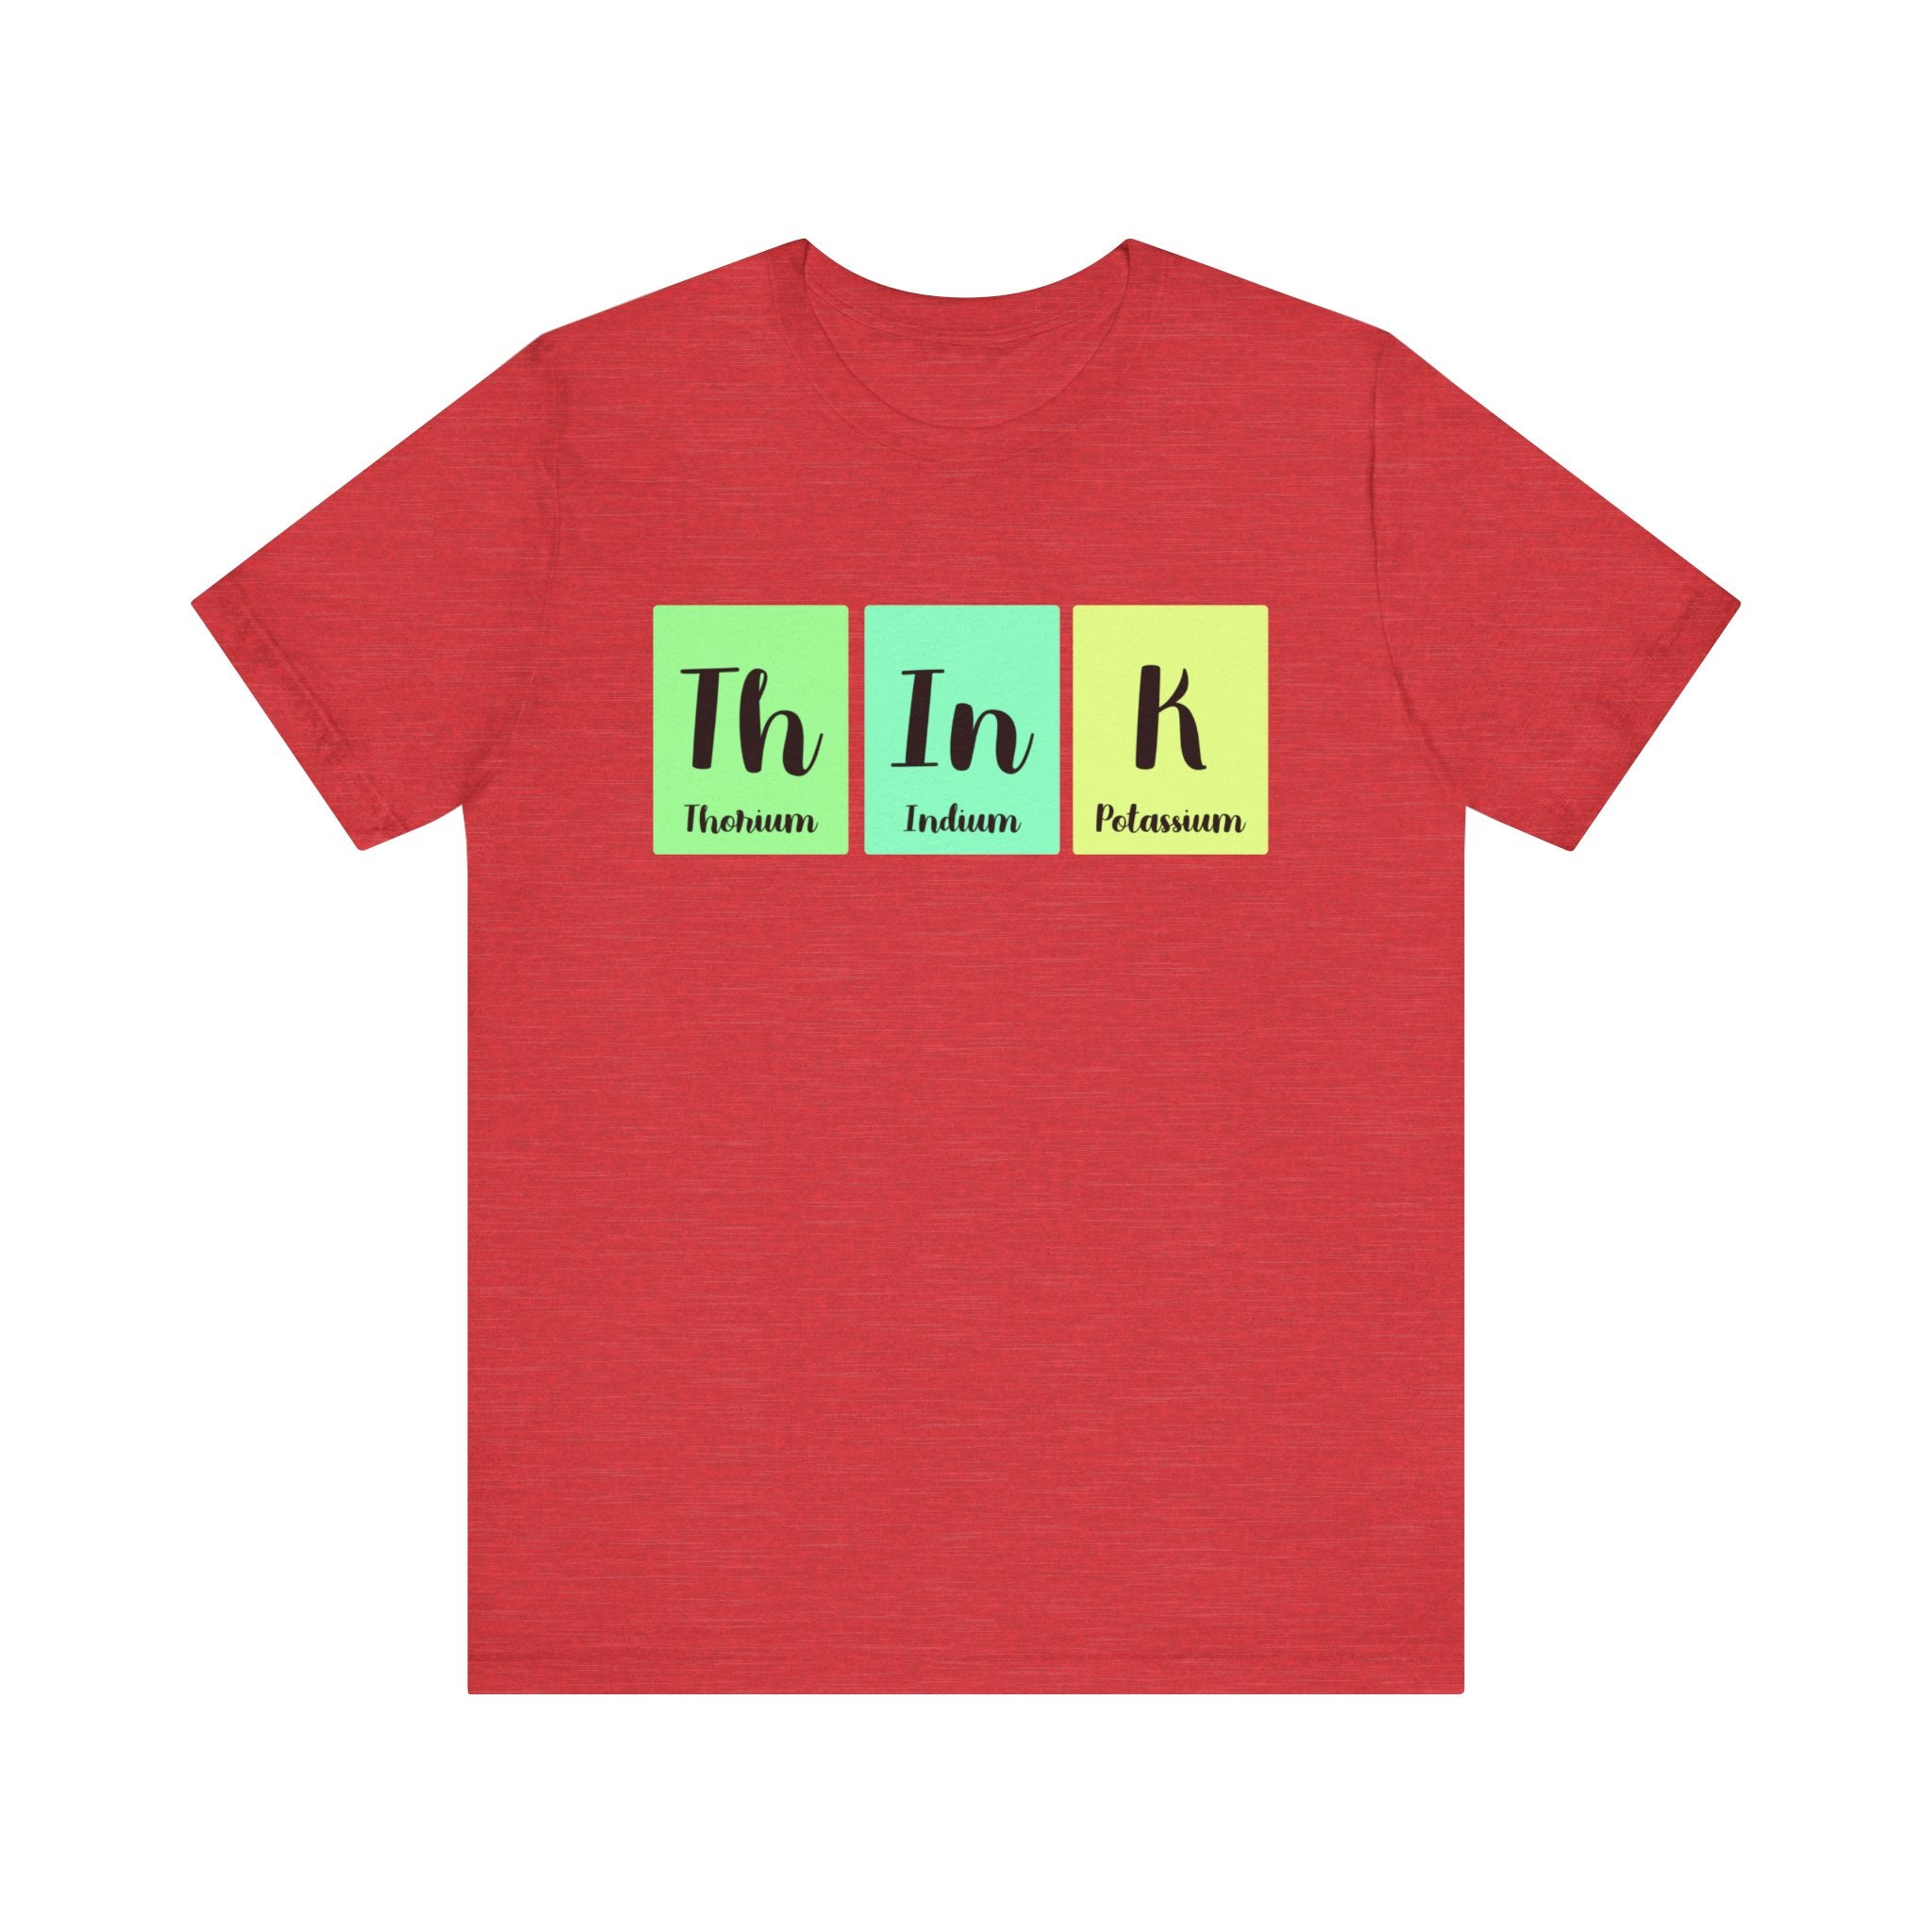 Red unisex jersey tee with the product Th-In-k displayed on it to spell "think.